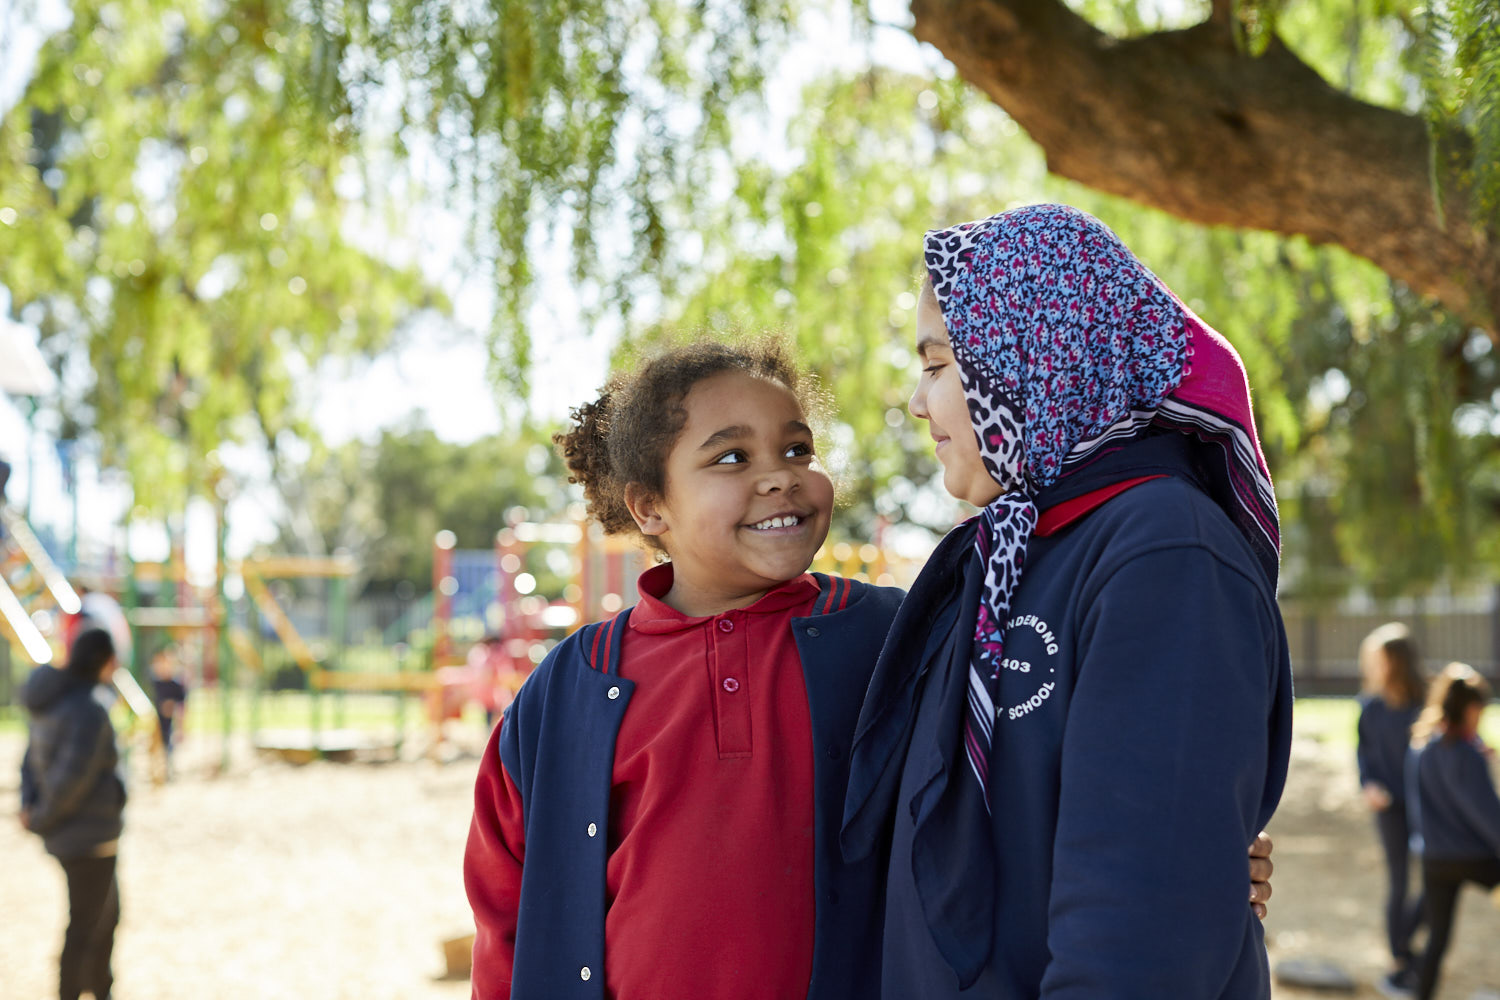 Two primary school aged students standing with their arms around each other in the playground, looking at each other and smiling.